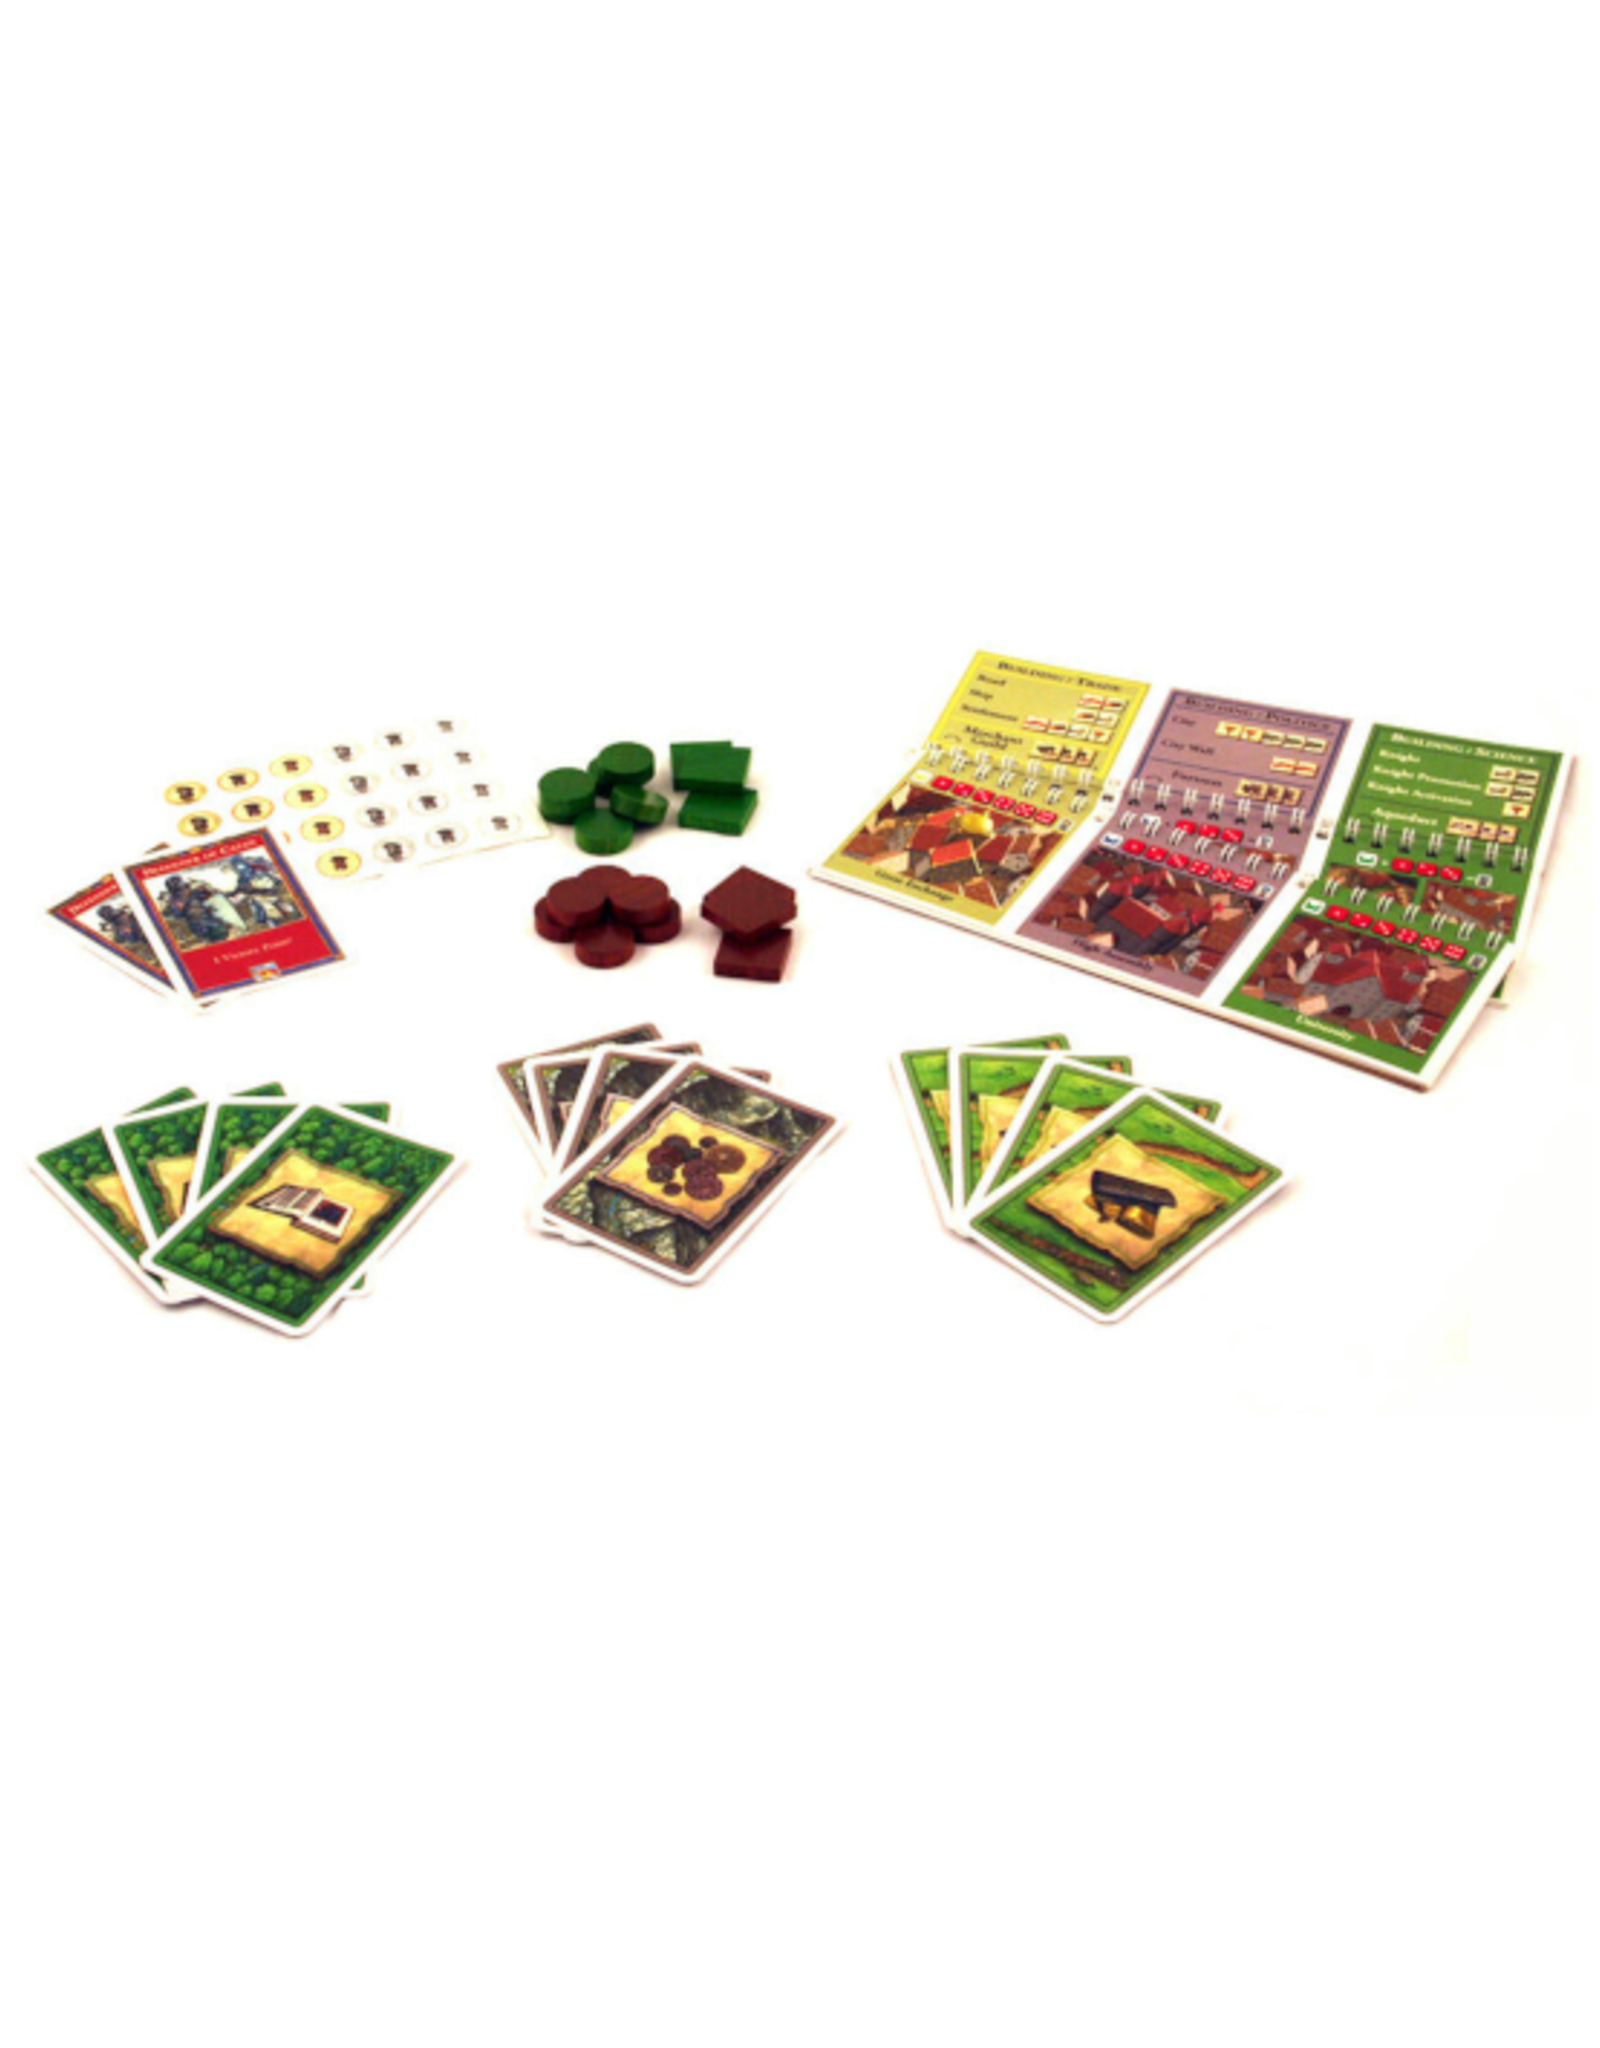 Catan Studios Catan - Cities & Knights - 5-6 Player Expansion